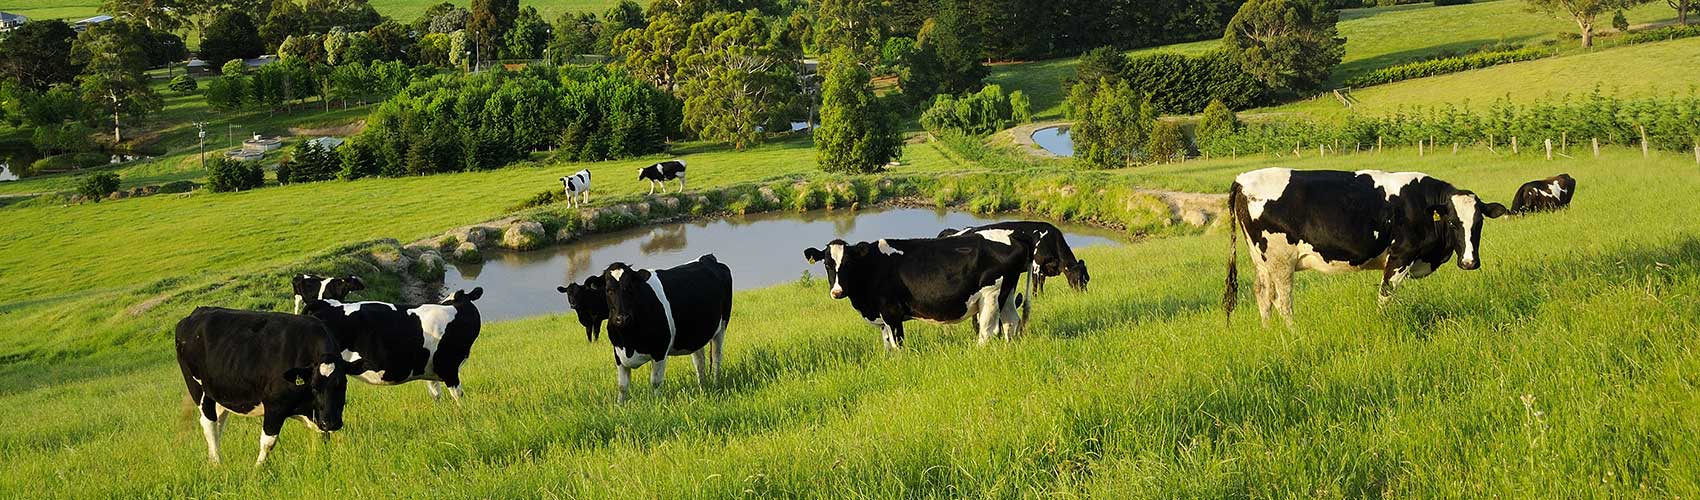 Cows in a field at Yarragon, West Gippsland